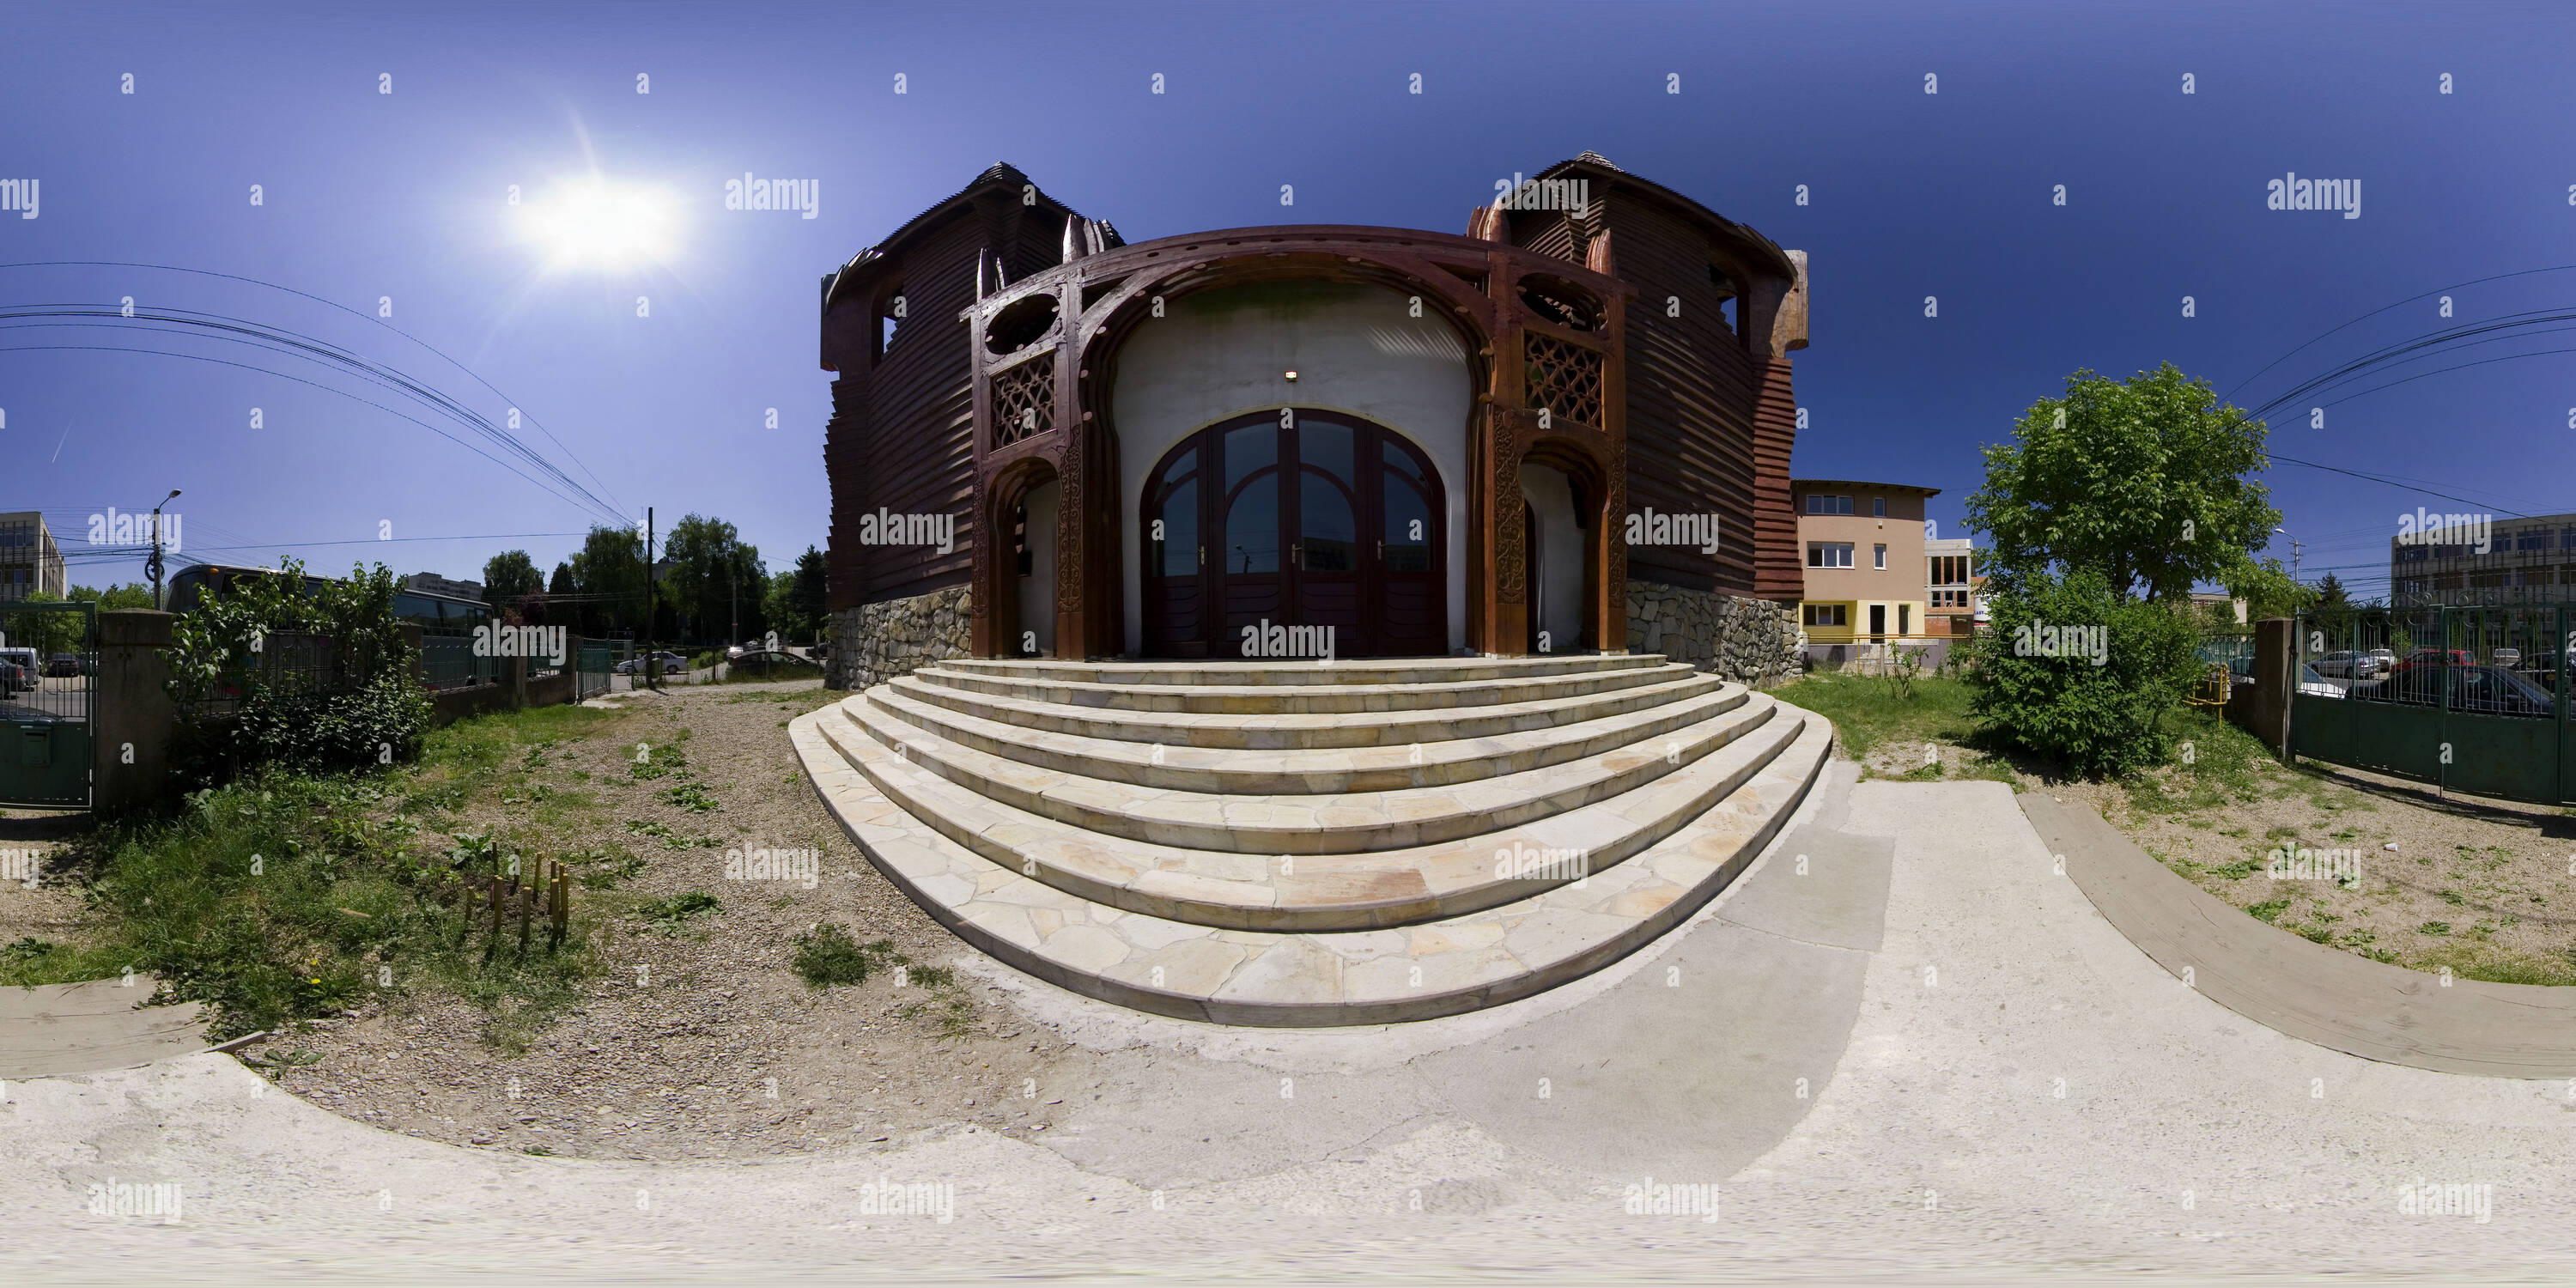 360 degree panoramic view of Reformed church - planning Imre Makovecz